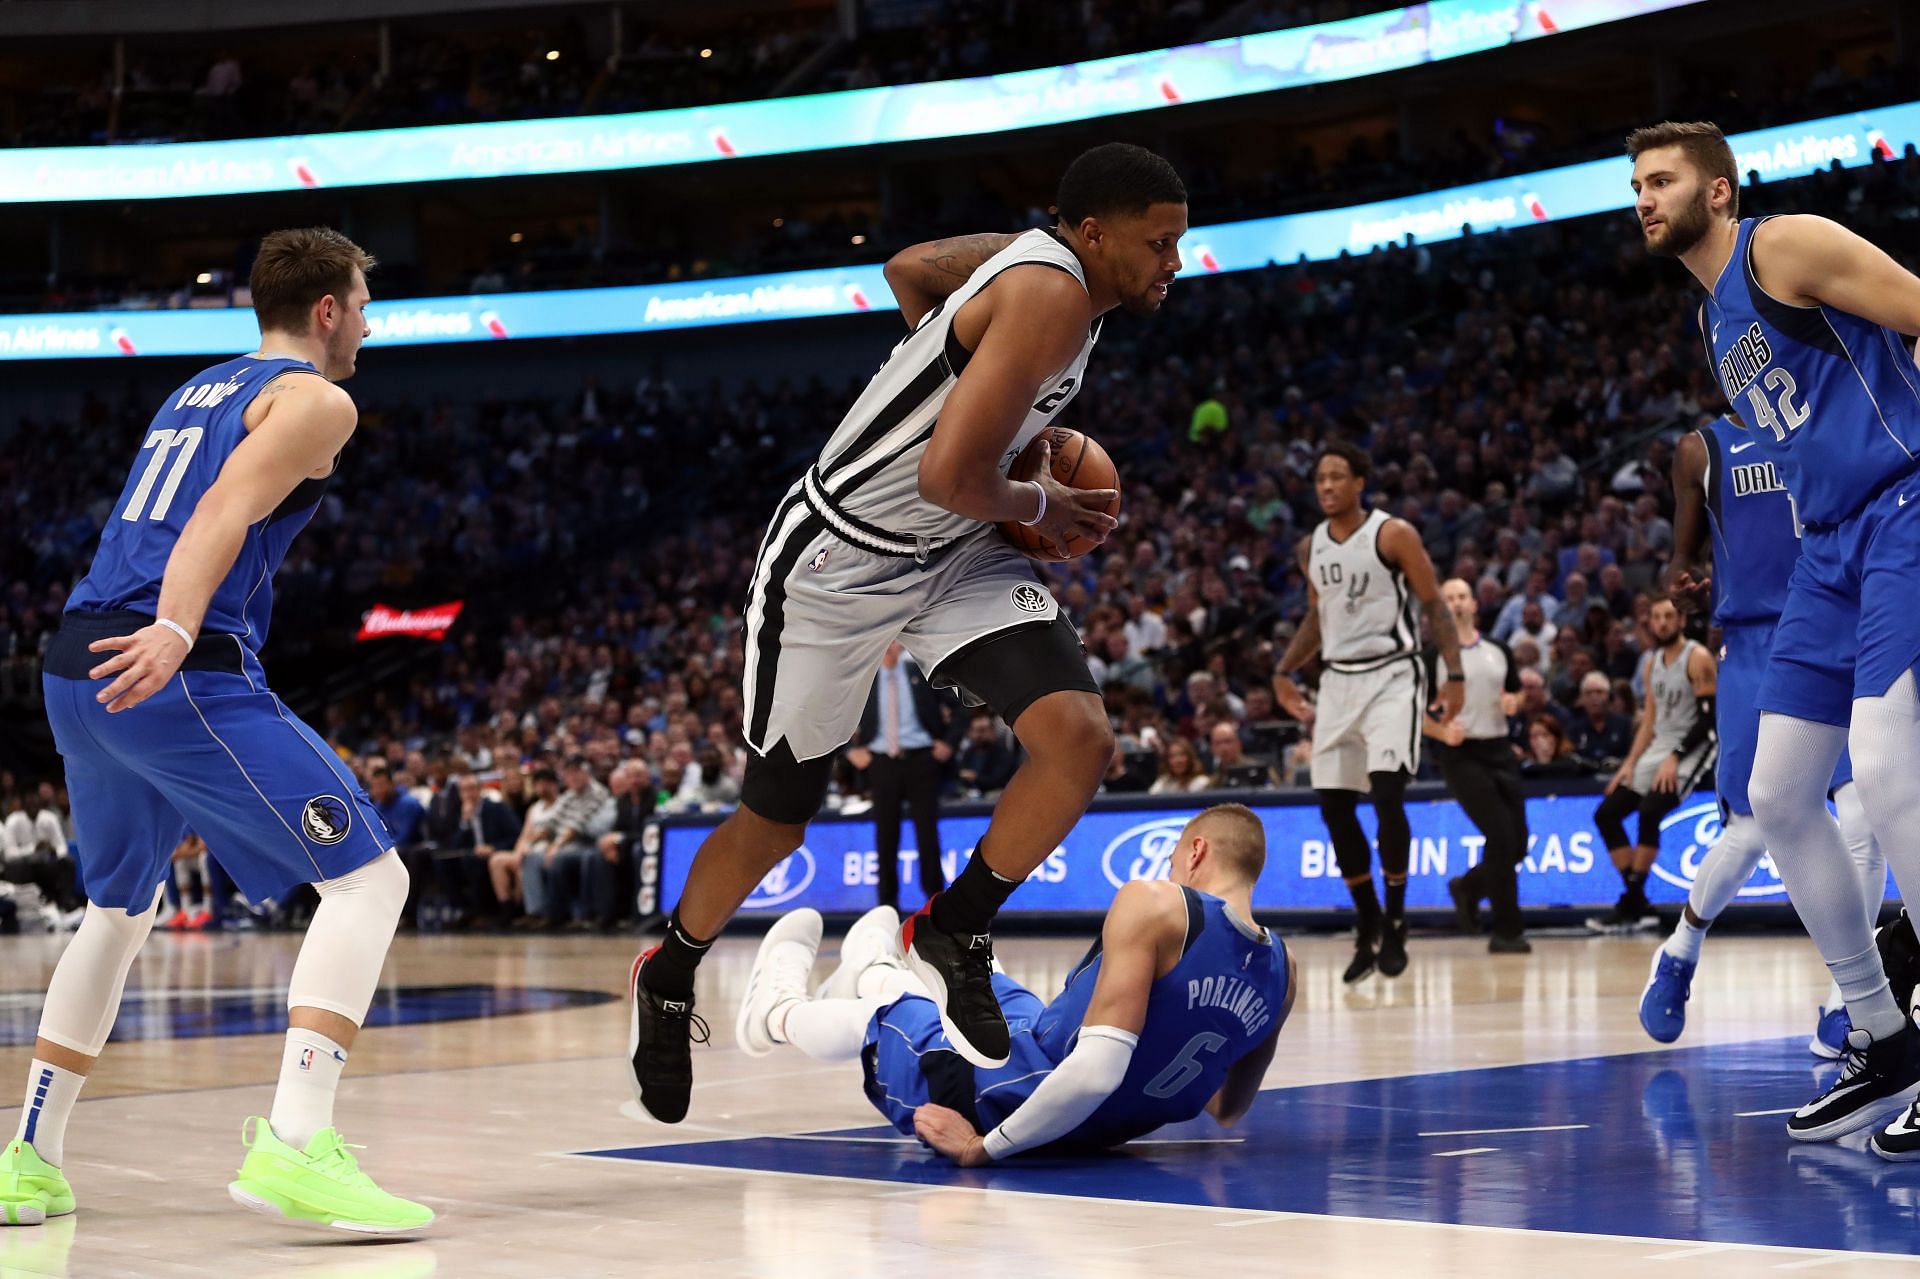 The Dallas Mavericks will host the San Antonio Spurs at American Airlines Center on October 28th, 2021 